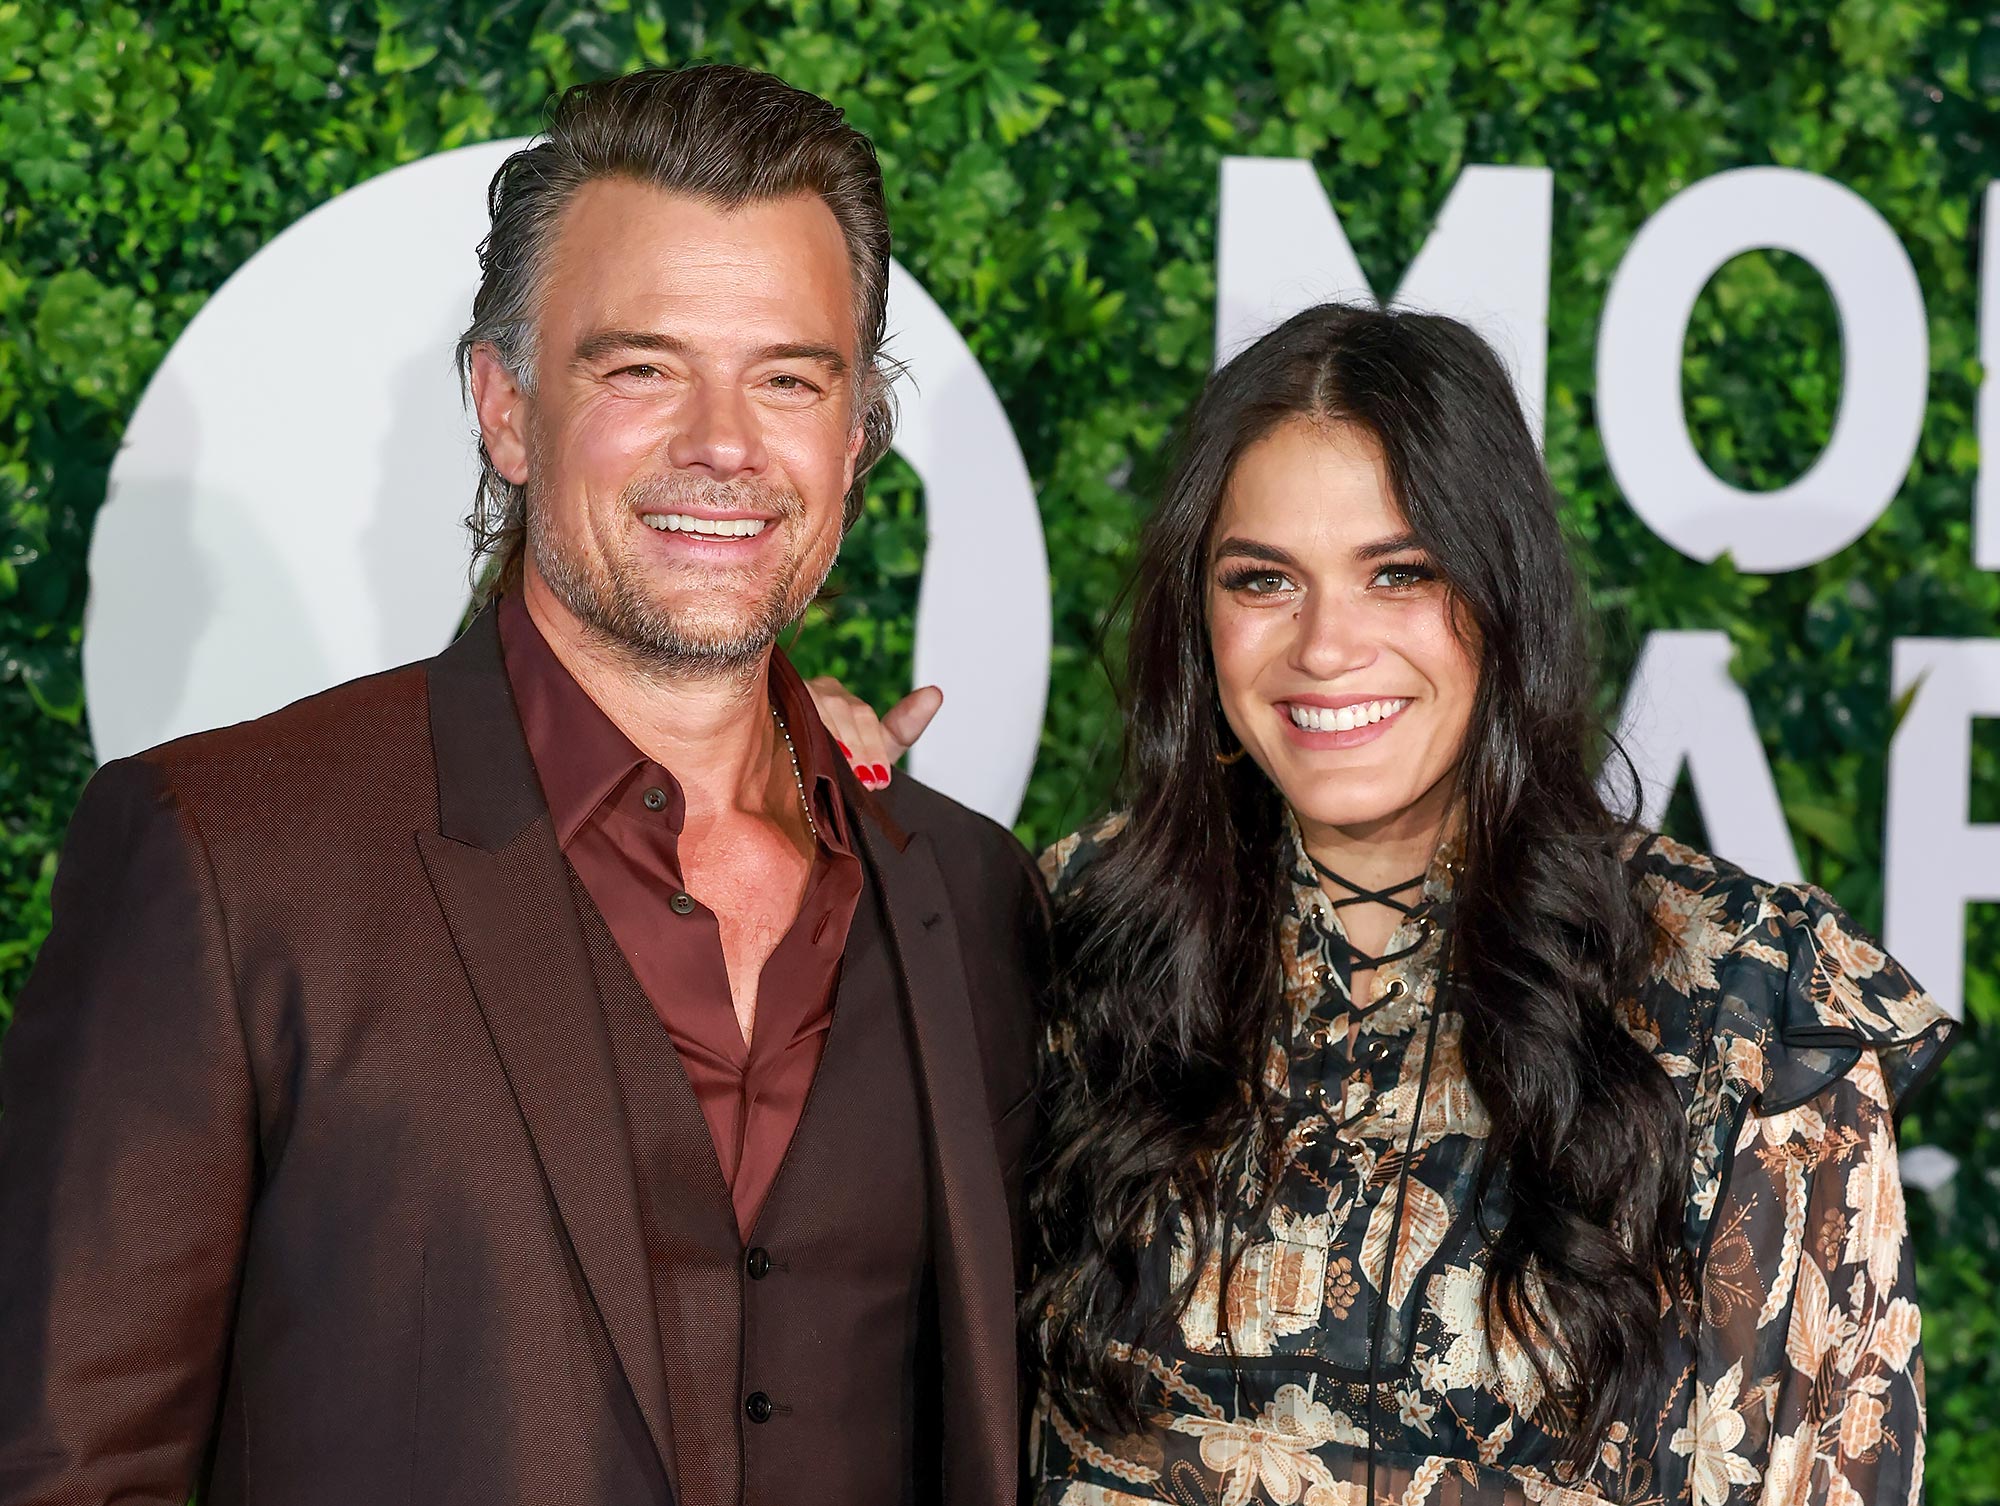 Josh Duhamel and Wife Audra Mari Welcome Their 1st Baby Together, His 2nd Child